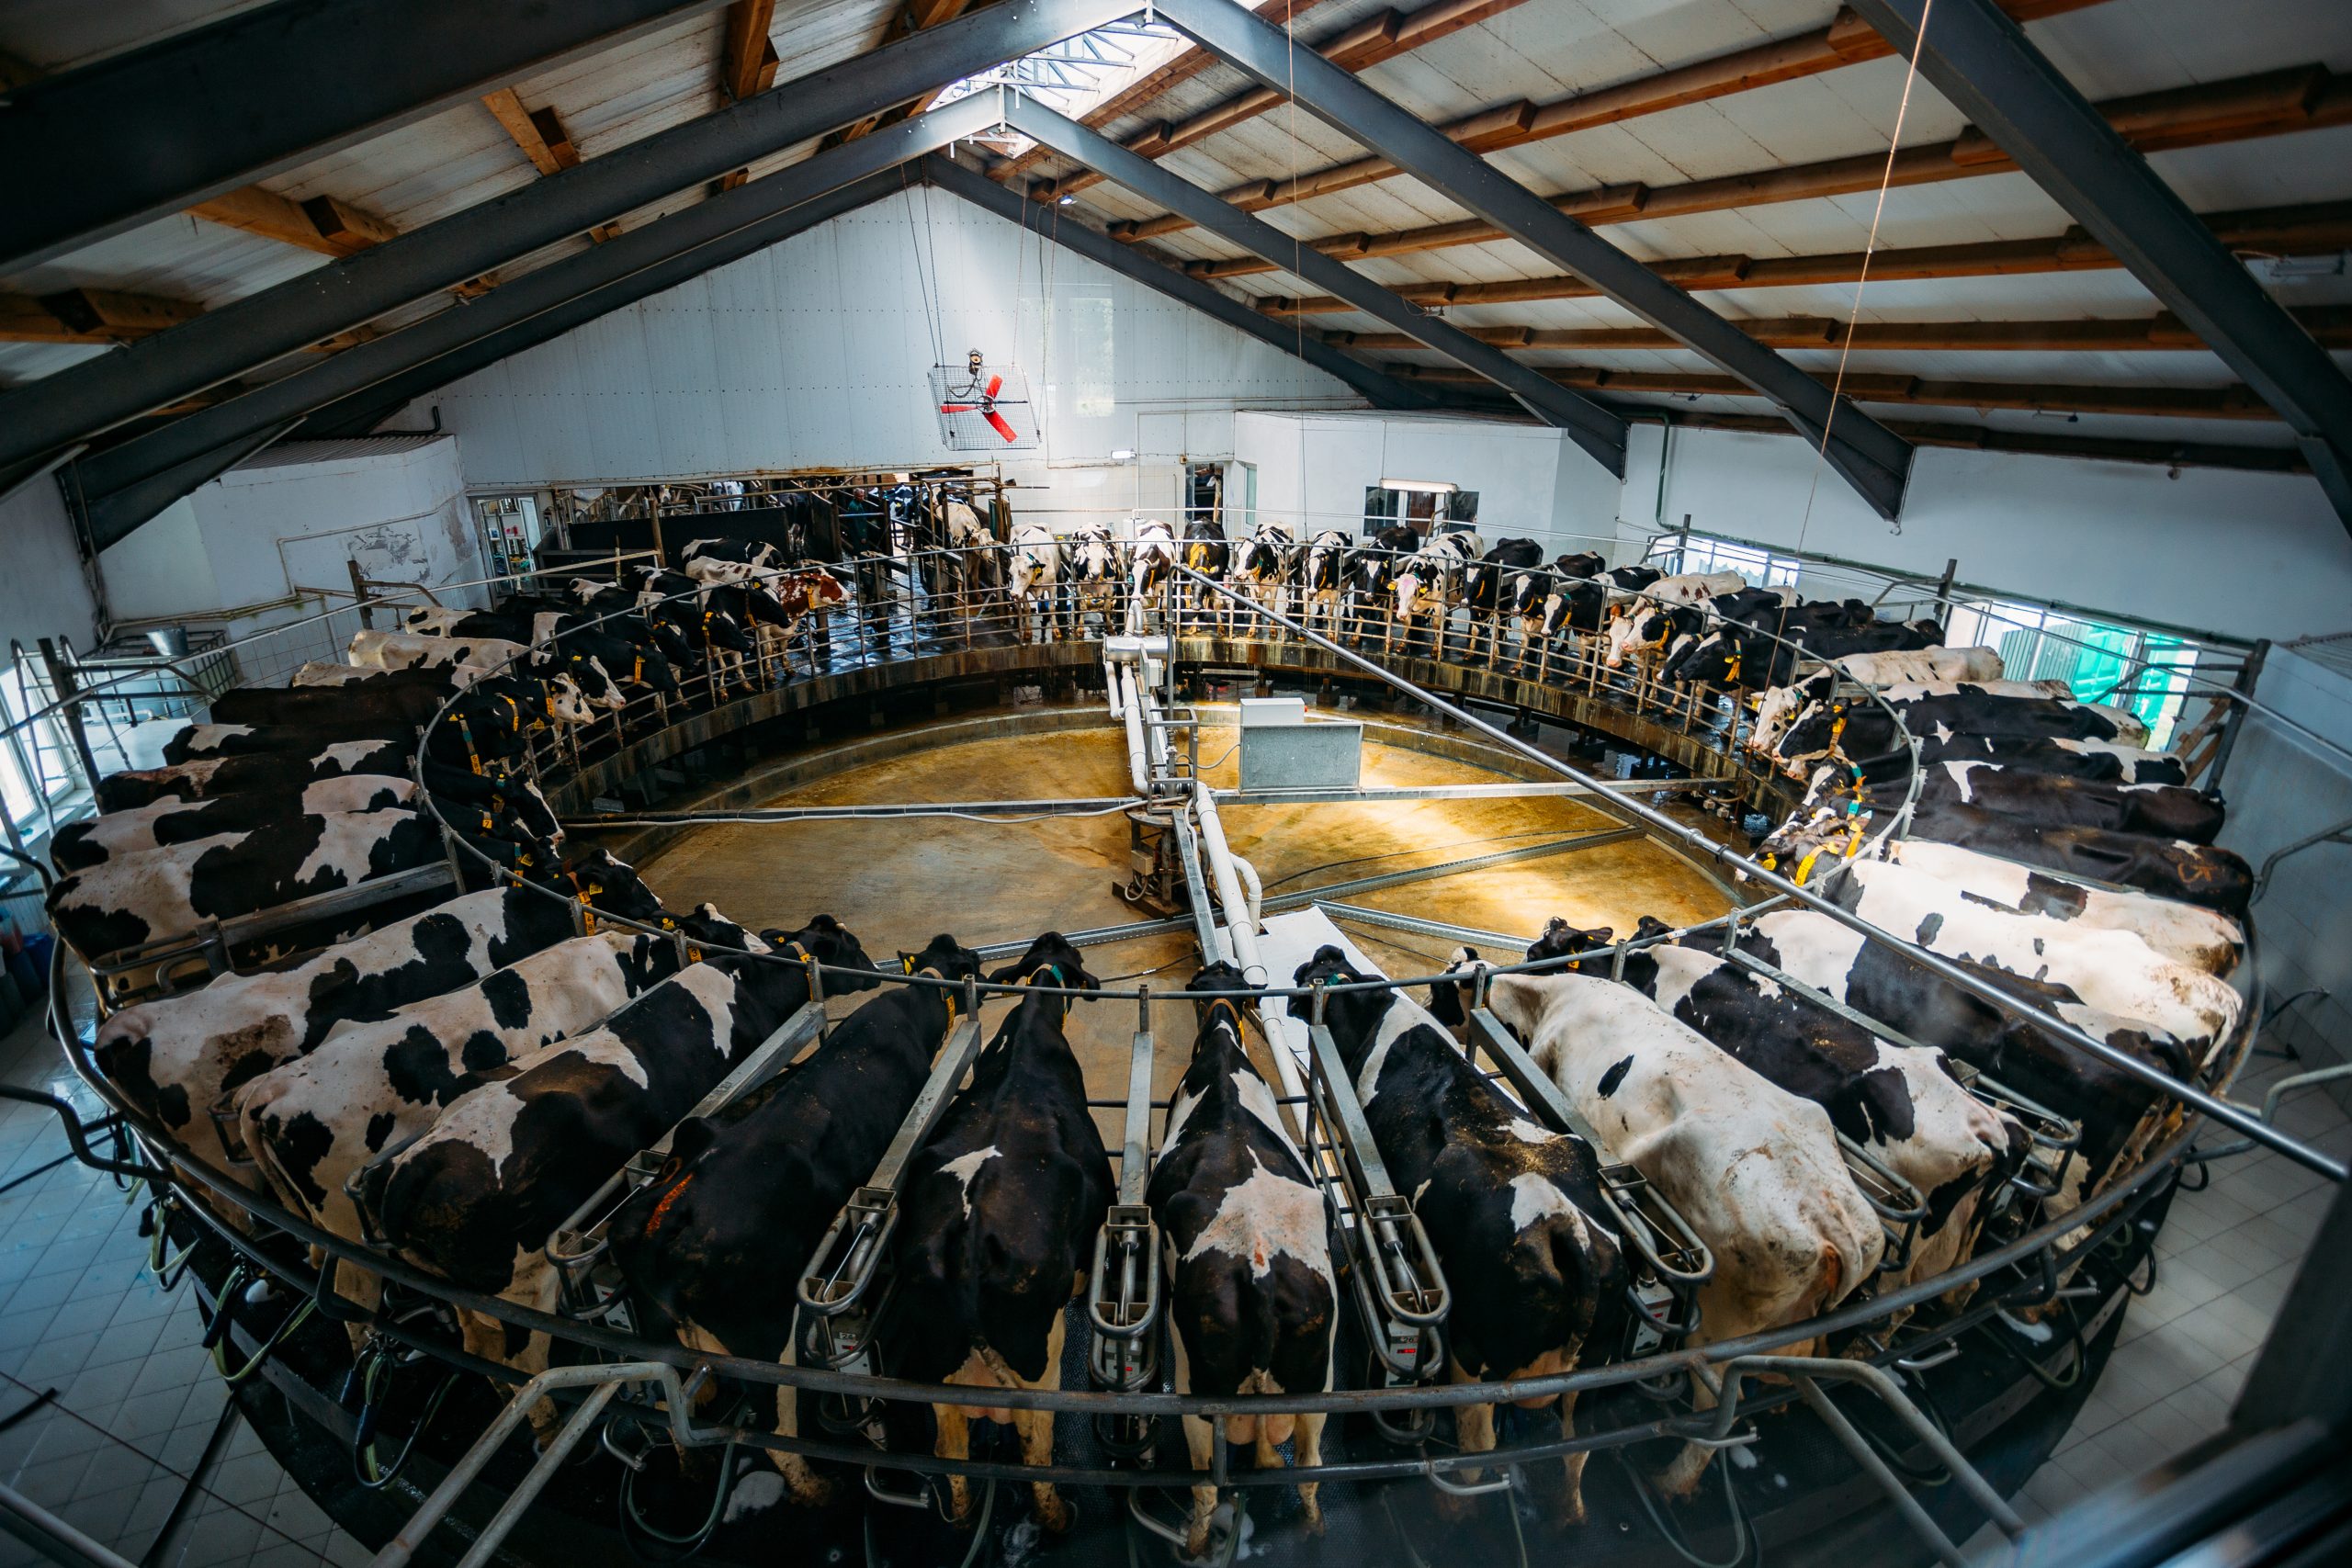 Robotic automatic industrial milking rotary system in modern dia